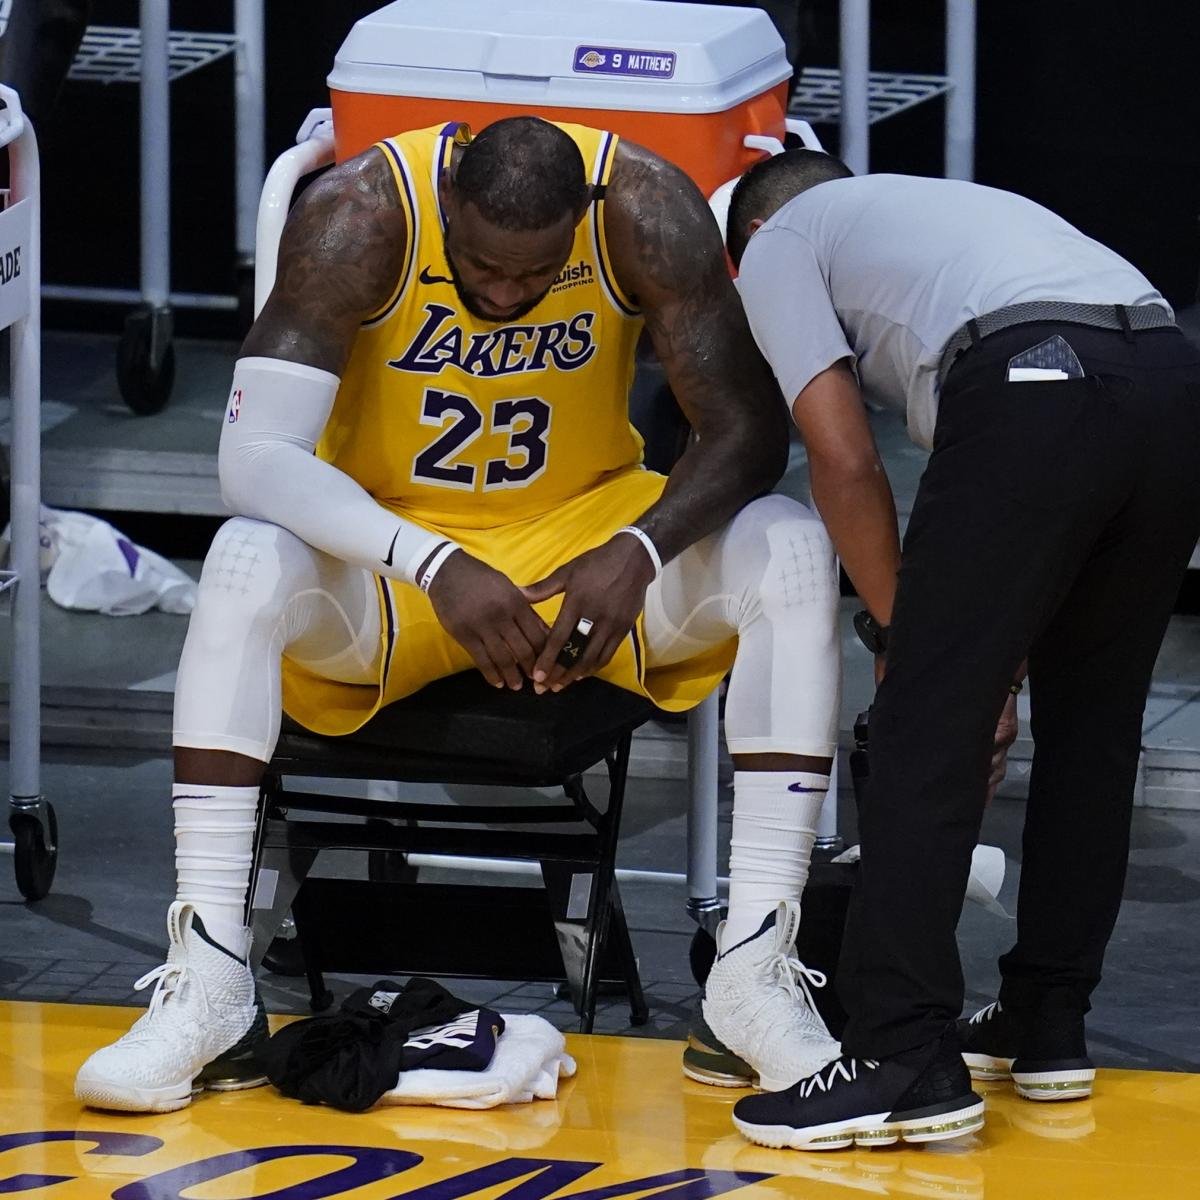 Is This the Beginning of the End for LeBron James?